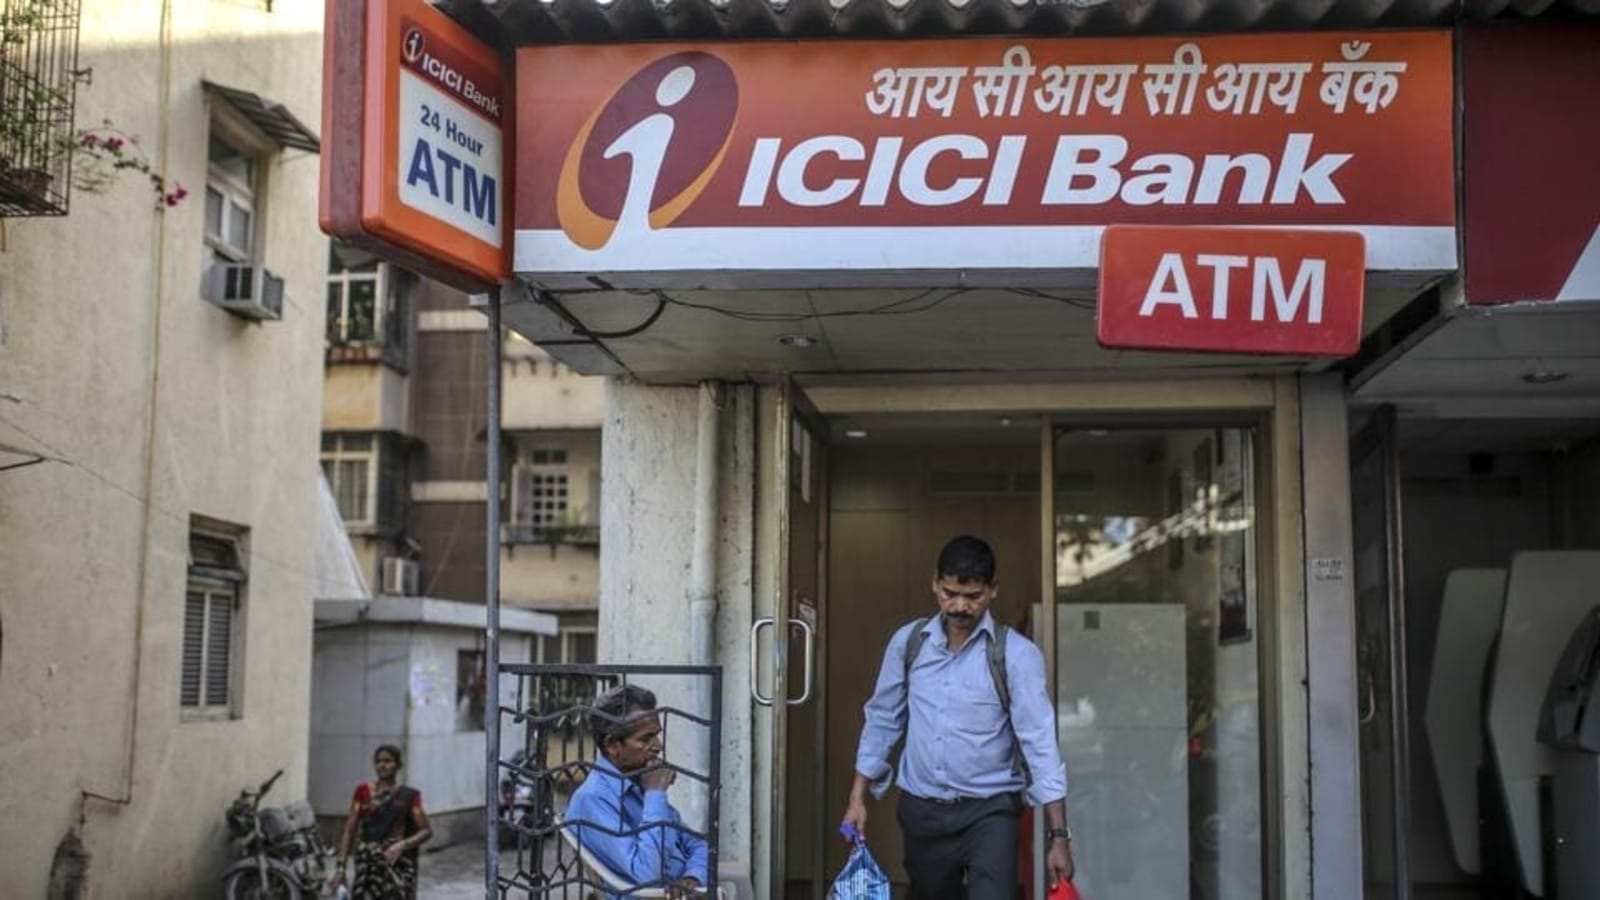 Rbi Slaps Penalty On Pnb And Icici Bank For Deficiencies In Regulatory Compliance Hindustan Times 5495